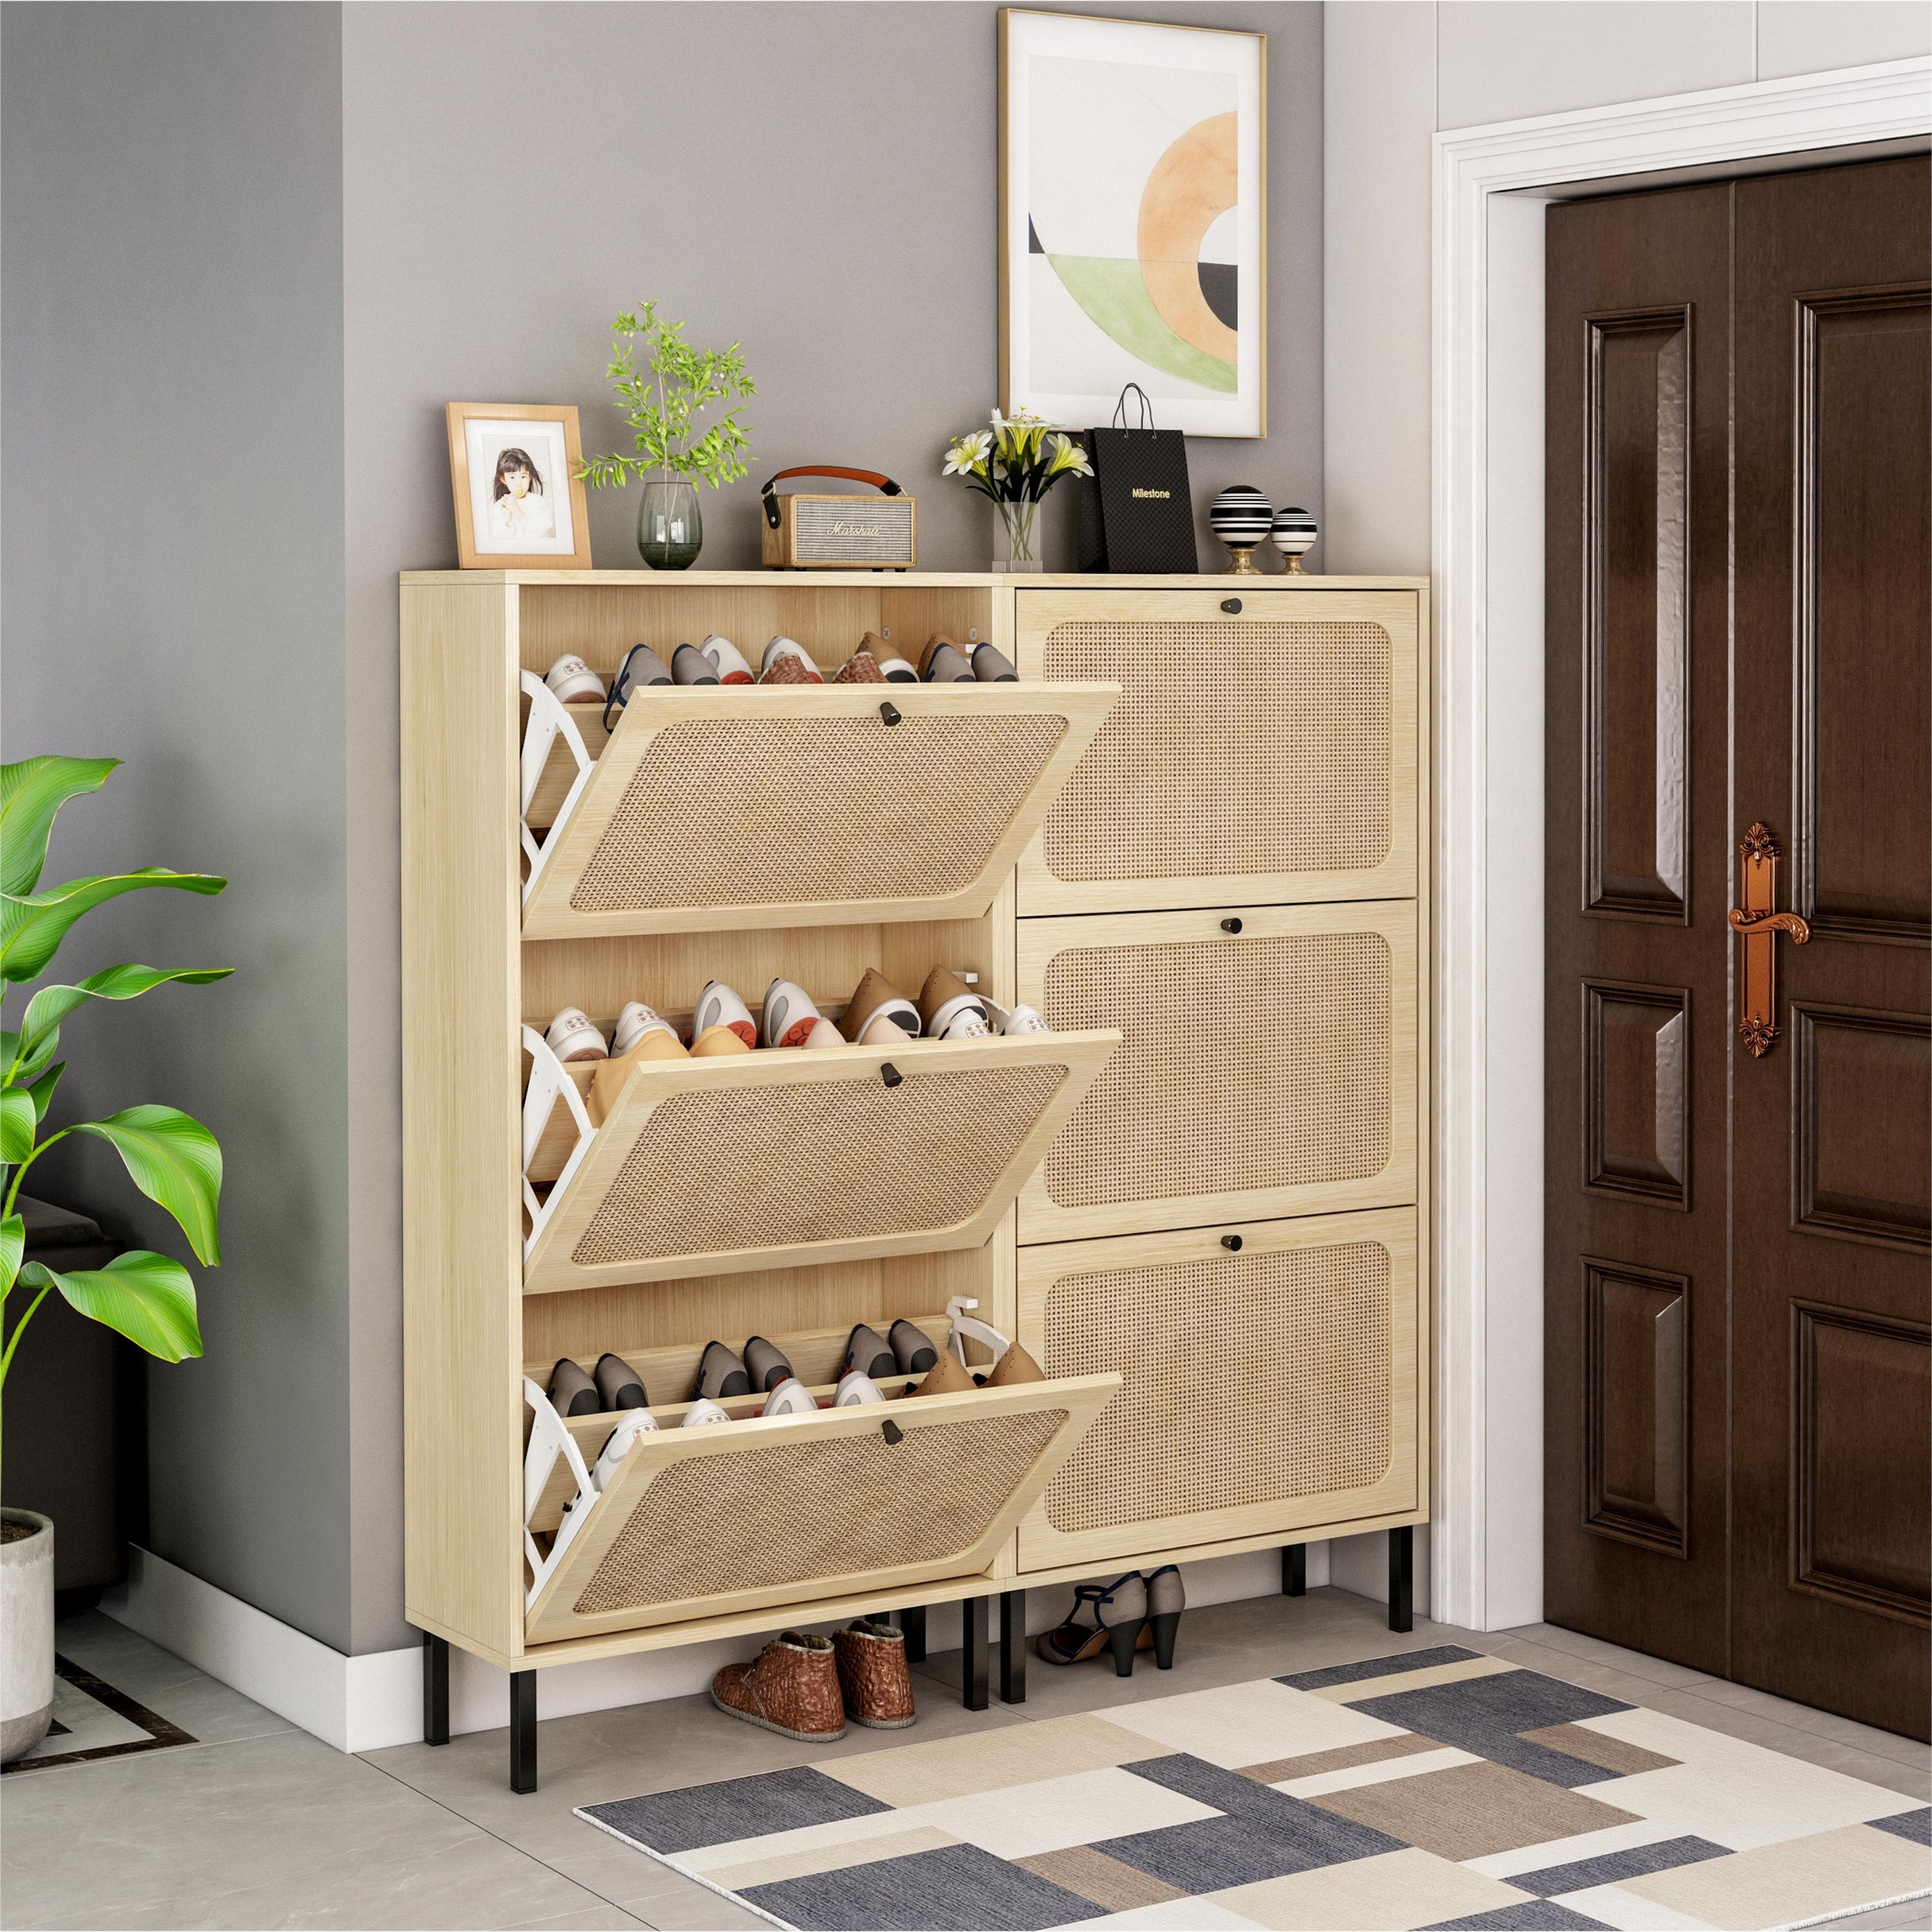 https://ak1.ostkcdn.com/images/products/is/images/direct/95b8829bfcf6ffeaee0648c200f814520ccd6f74/Freestanding-3-Flip-Drawers-Shoe-Rack-and-3-Door-Slim-Entryway-Shoe-Organizer-with-Half-Round-Woven-Rattan-Doors.jpg